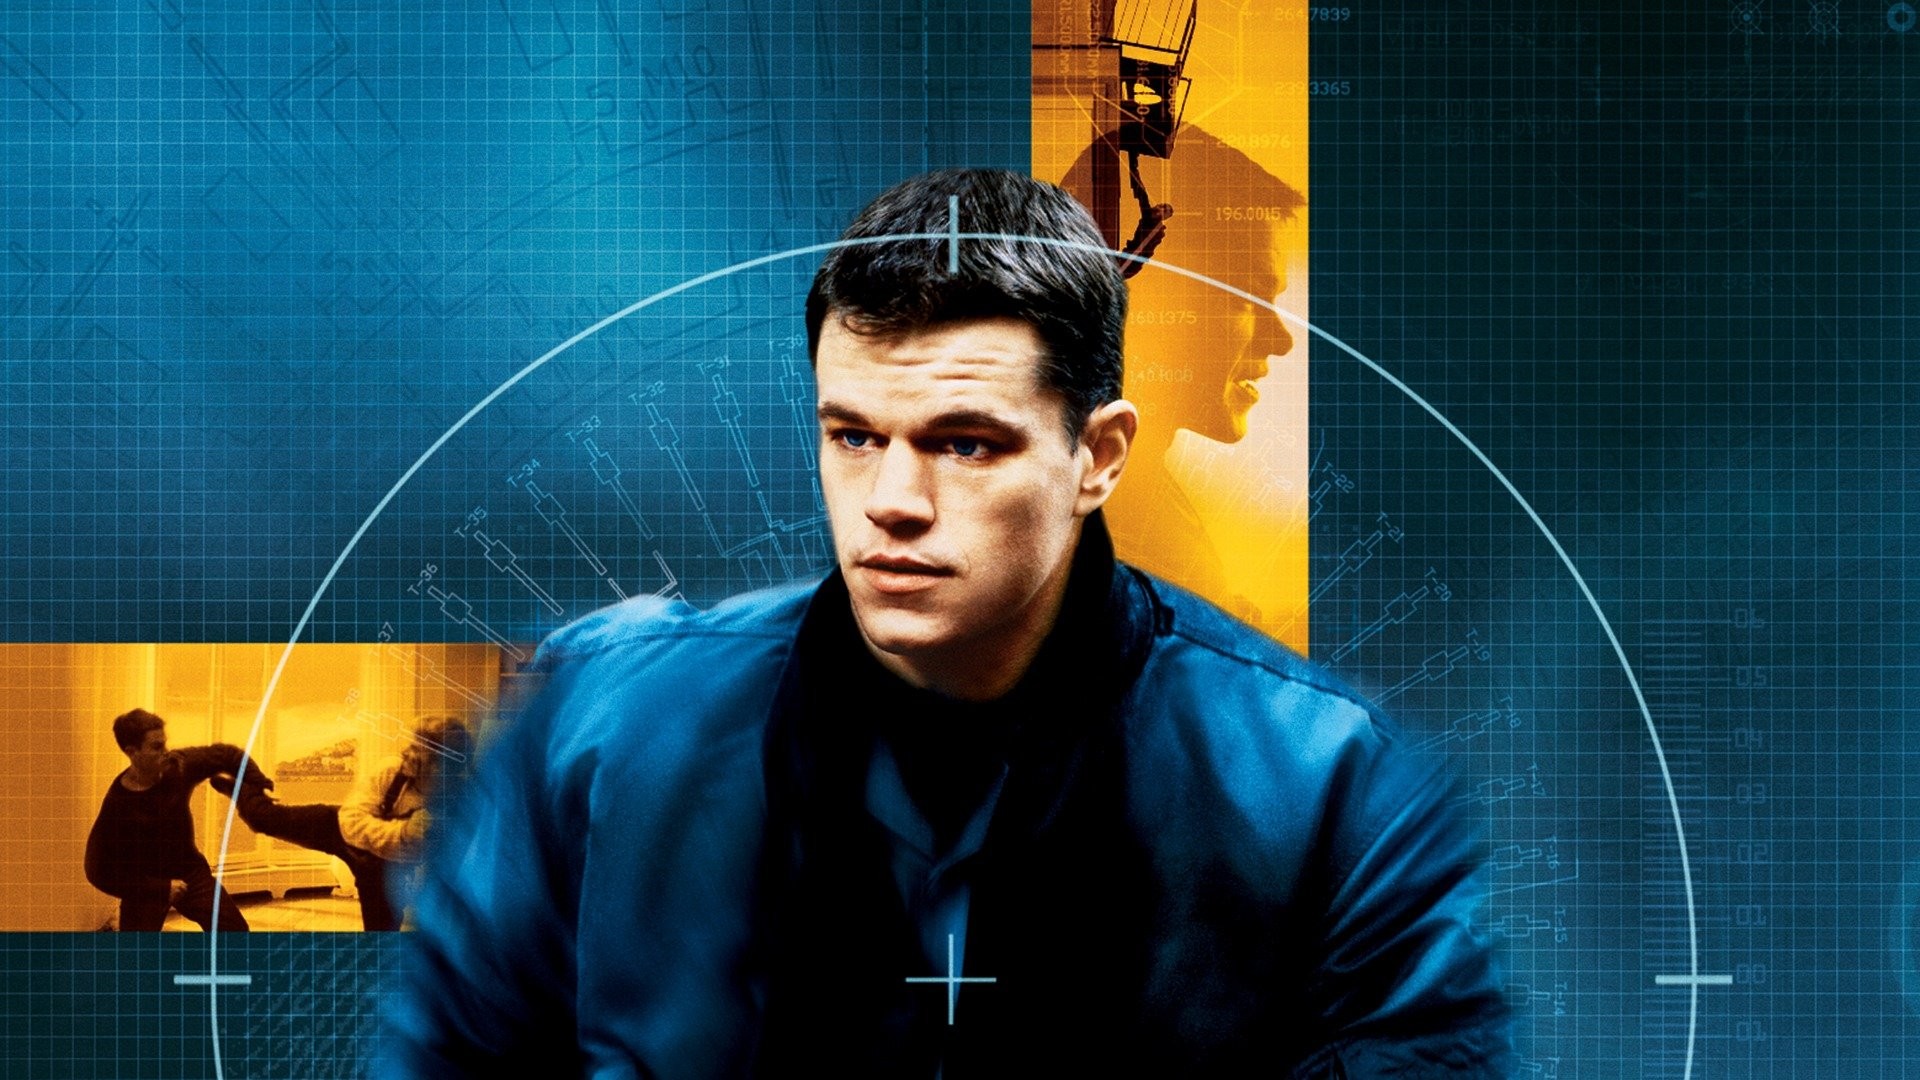 Image gallery for The Bourne Supremacy - FilmAffinity